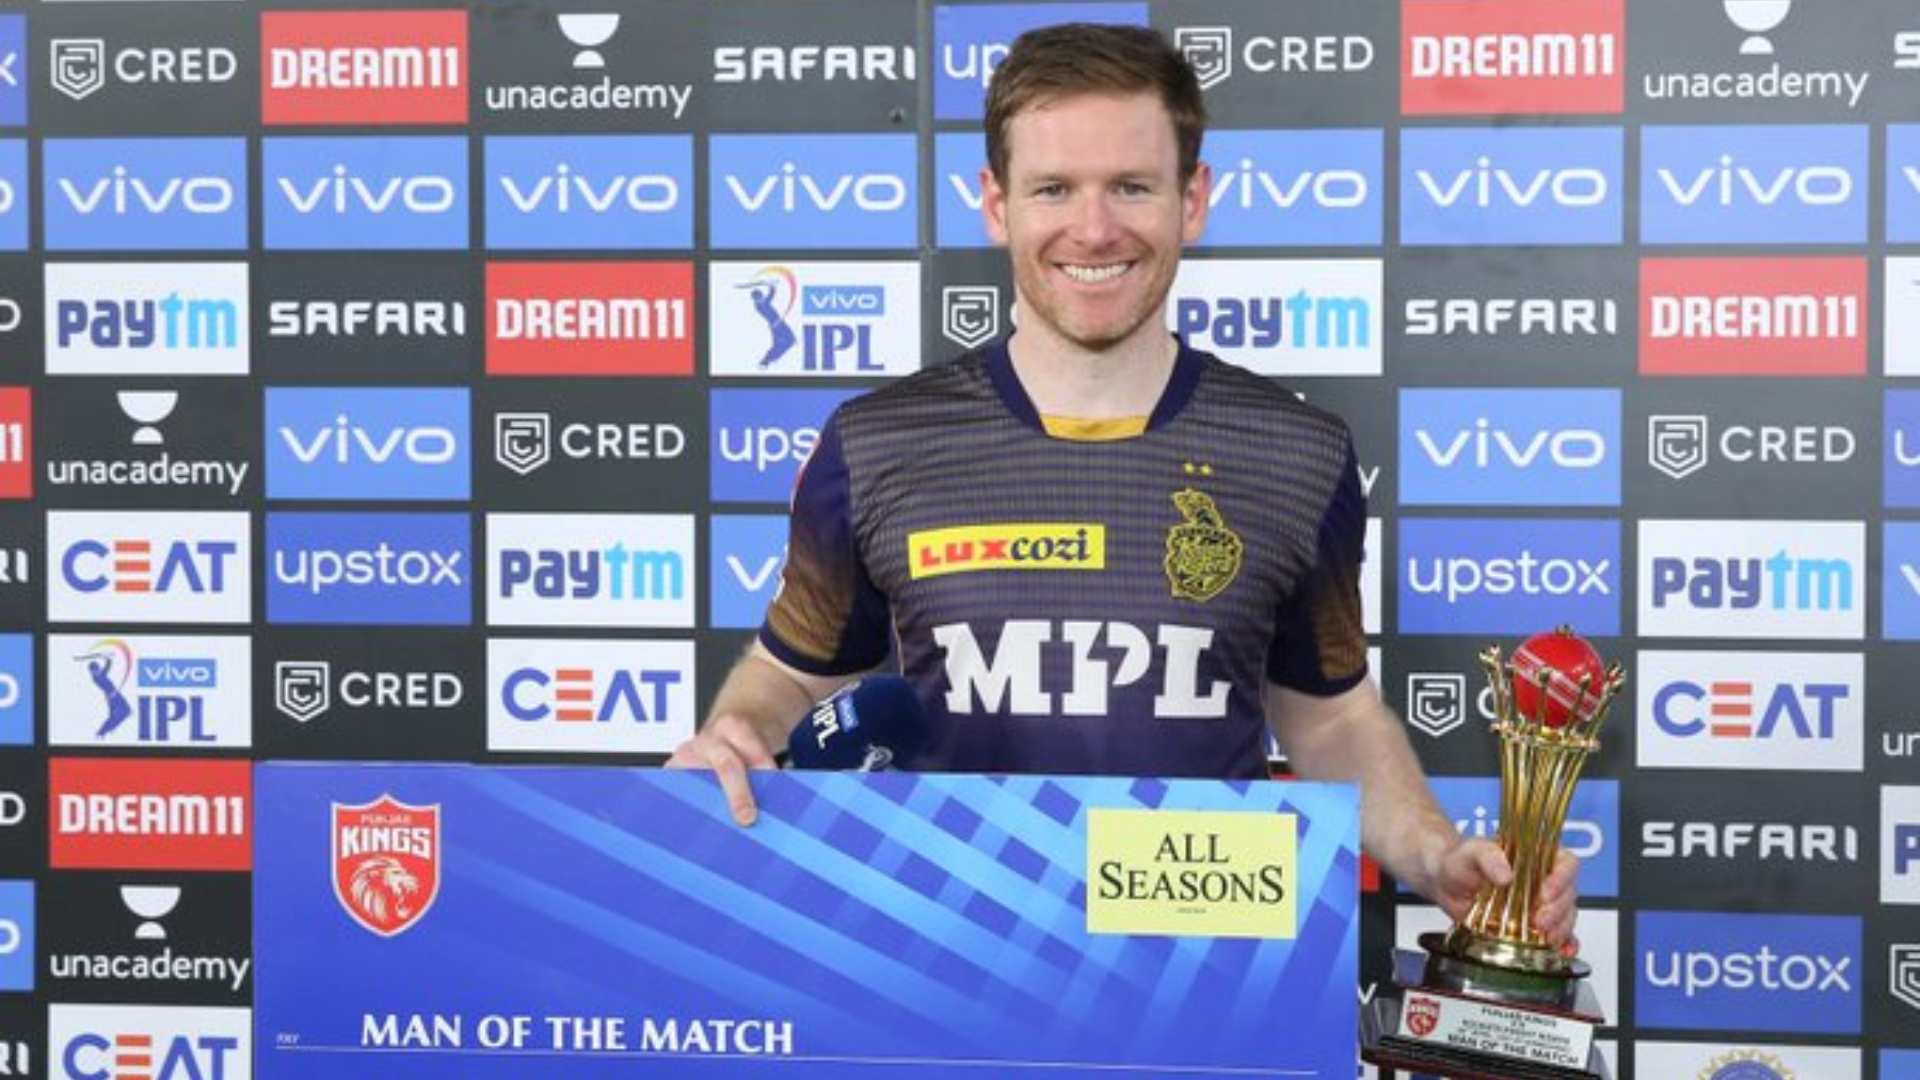 Eoin Morgan played a captain's knock as Kolkata Knight Riders secured a great win against Punjab Kings in IPL 2021.